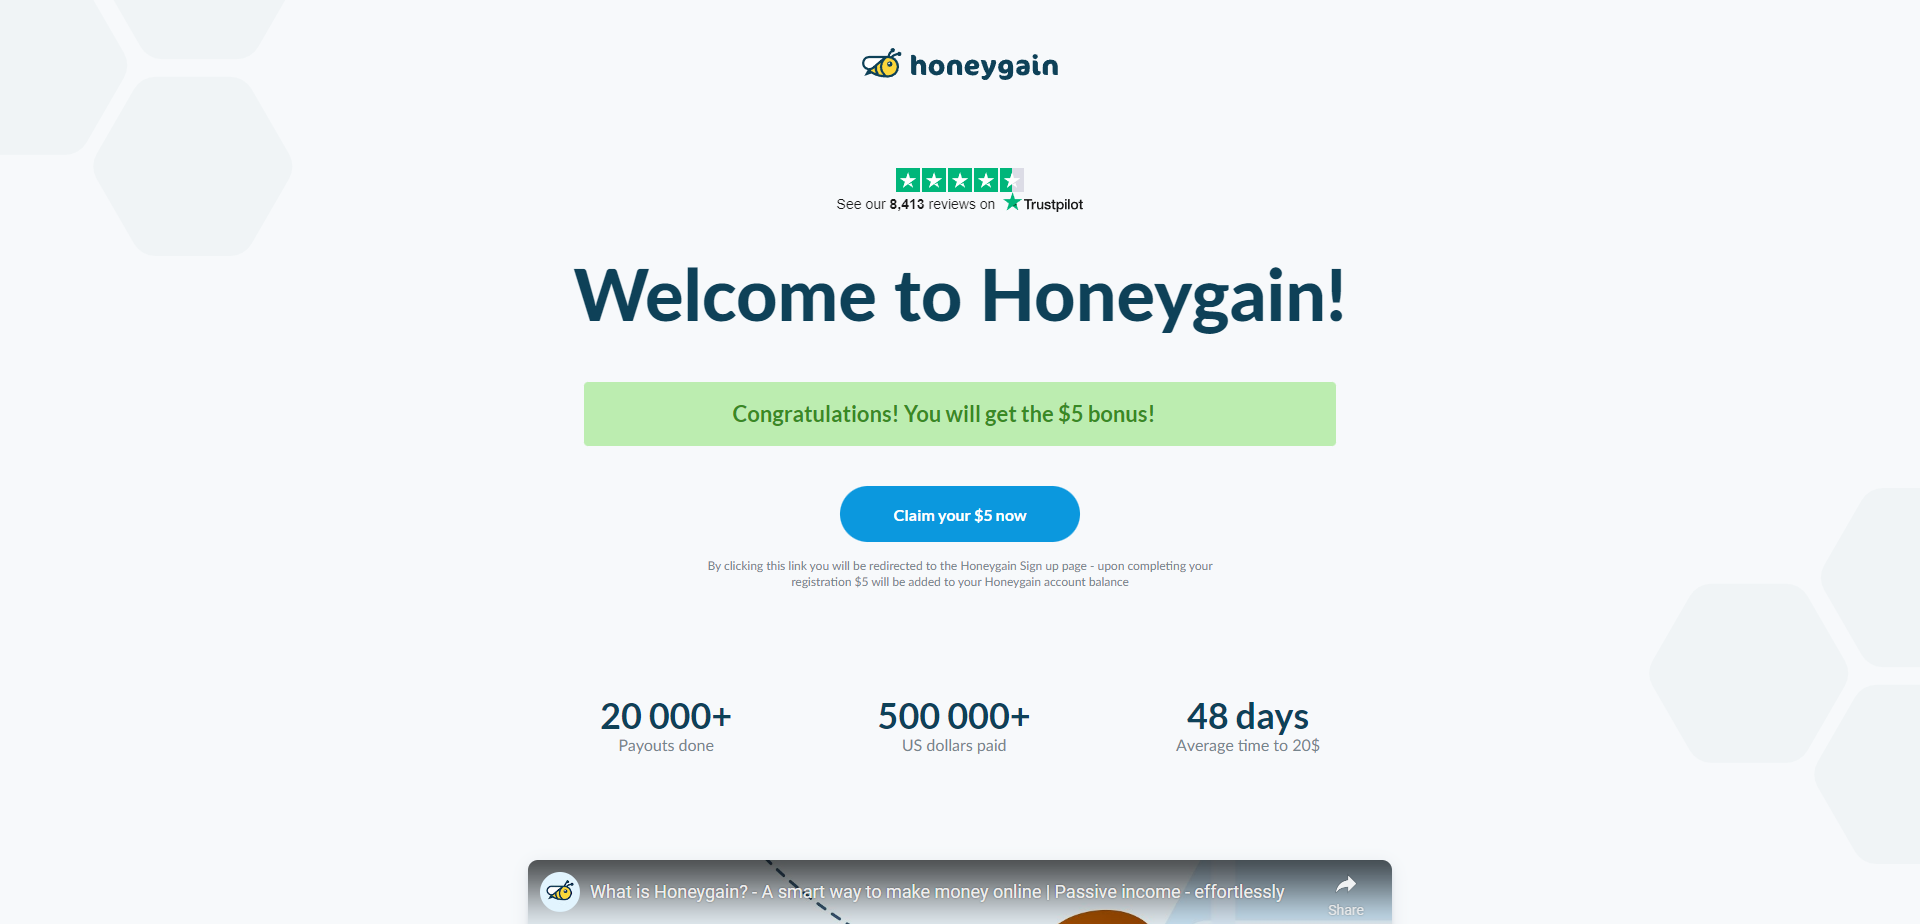 Landing Page for Honeygain